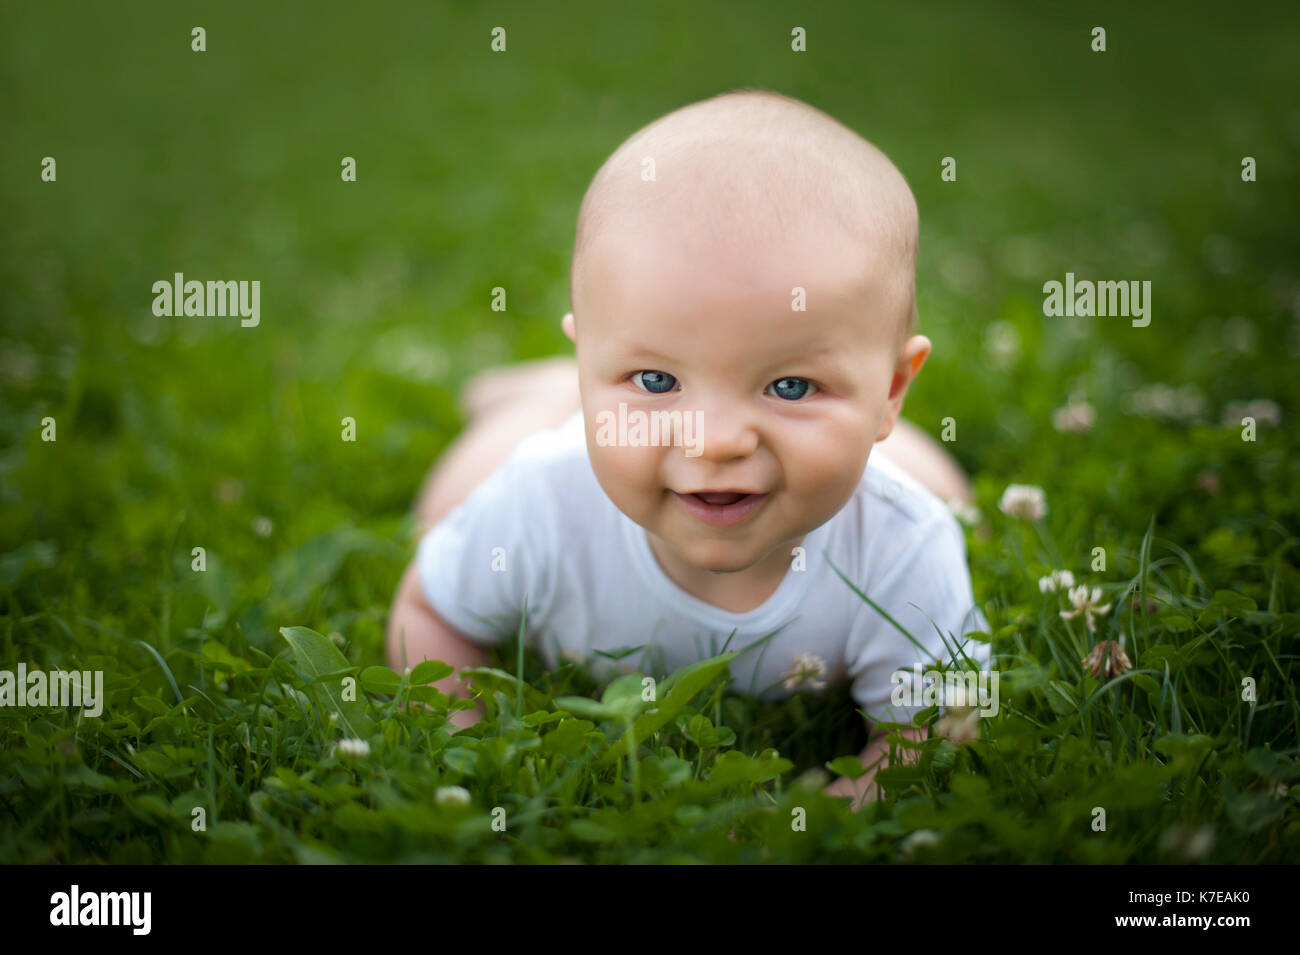 little boy laing in the grass Stock Photo